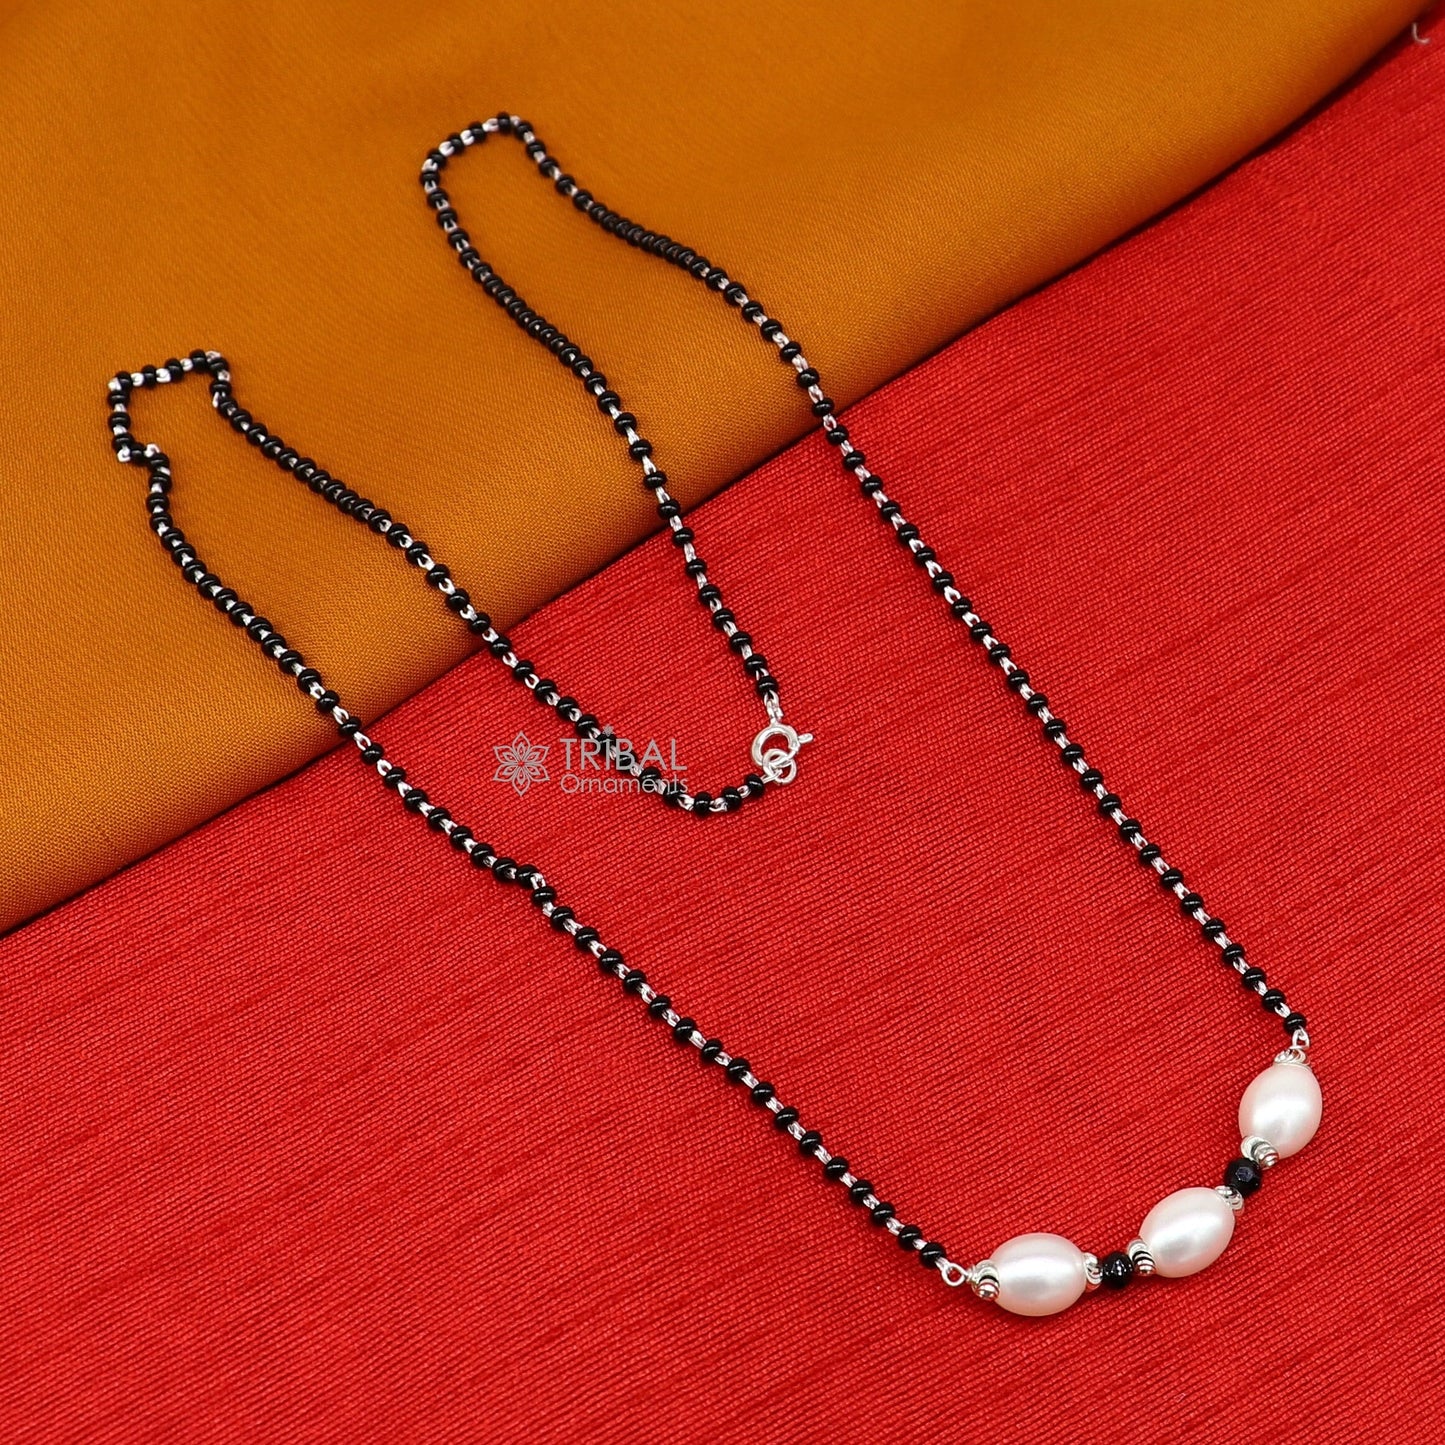 Elegant 925 sterling silver black beads chain necklace, gorgeous small stone design pendant, Mangalsutra chain beaded necklace set639 - TRIBAL ORNAMENTS